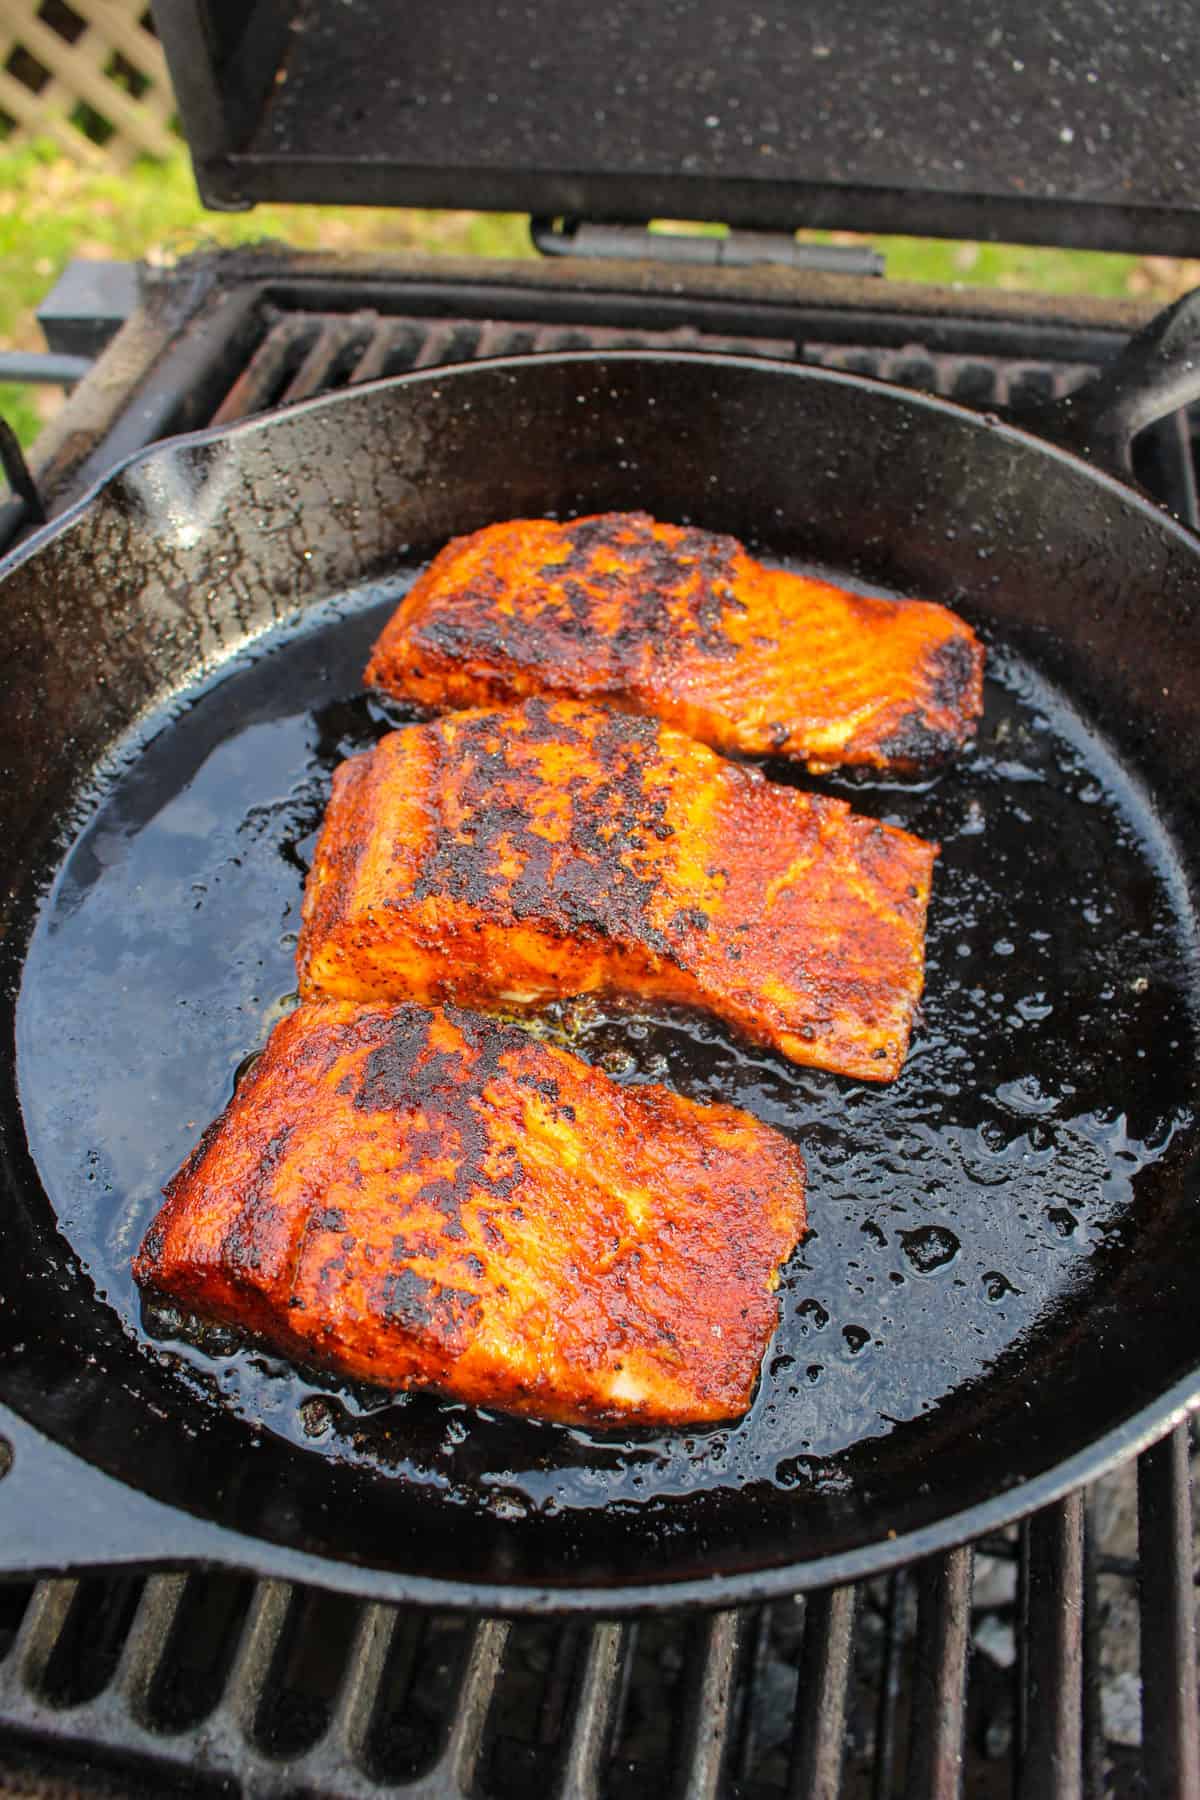 Flipping the salmon back over to top it with the Honey Garlic Butter.